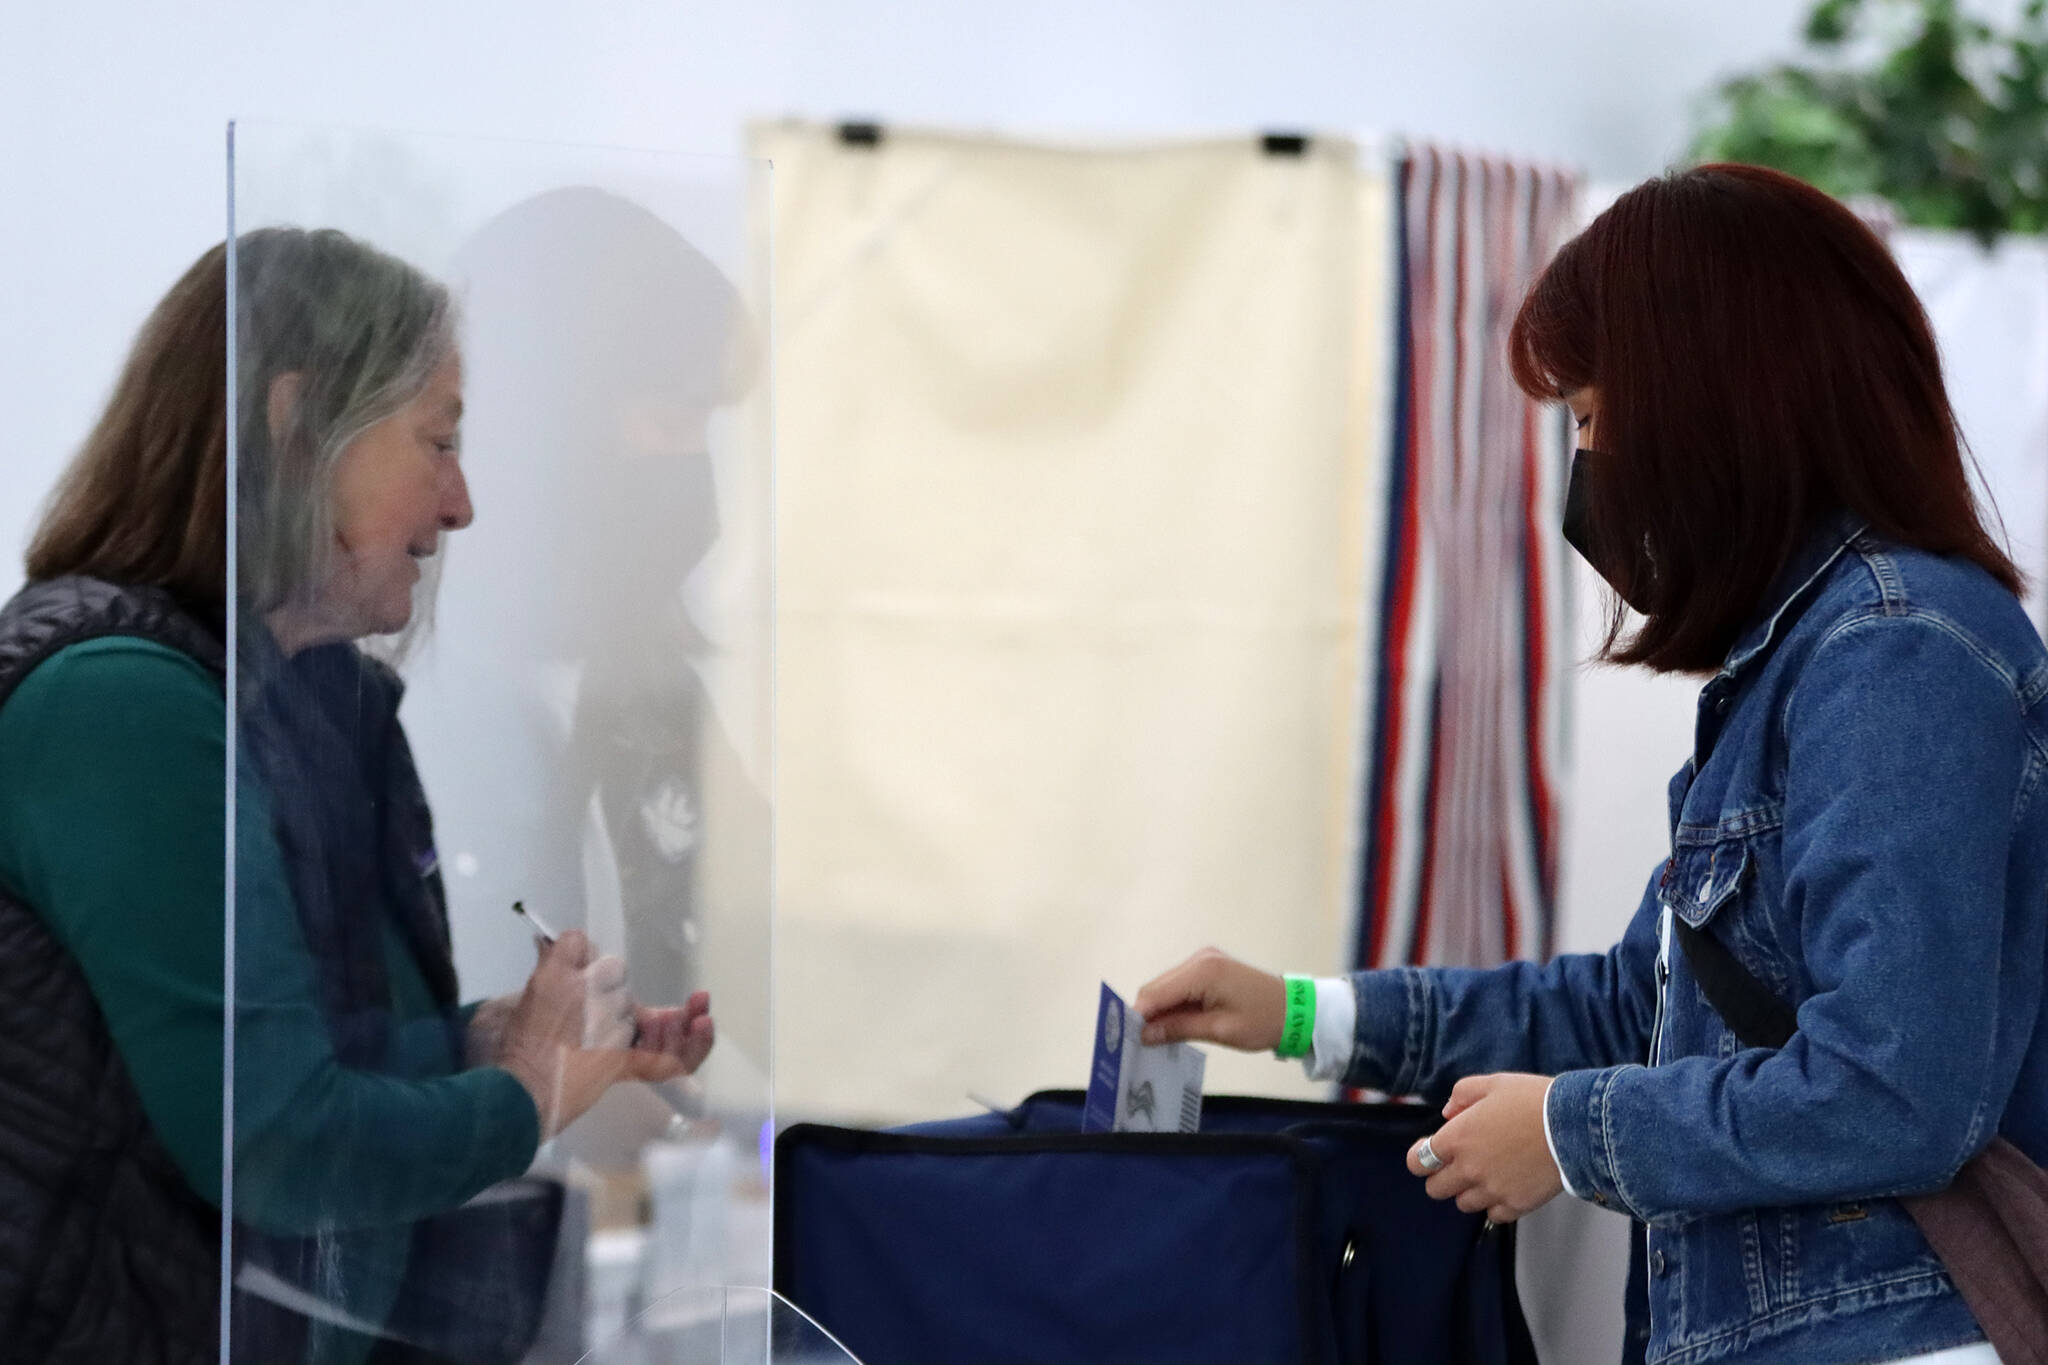 Election official Barb Murray watches as voter Alicia Duncan places her ballot in a receptacle during the special primary election to fill Alaska’s lone seat in the U.S. House of Representatives. (Ben Hohenstatt / Juneau Empire)